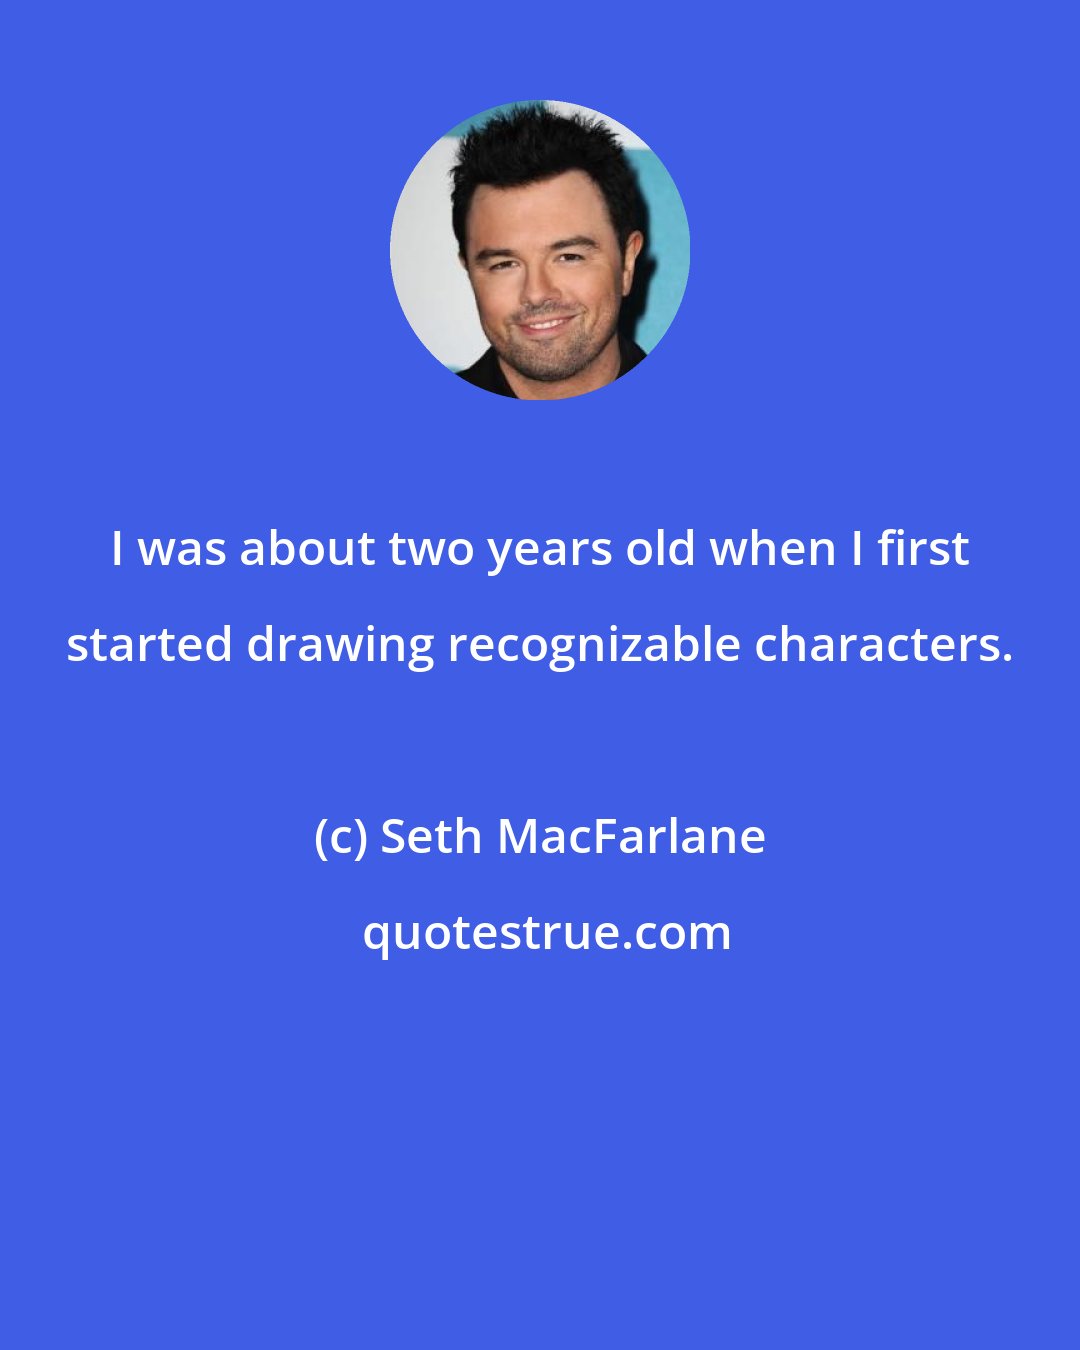 Seth MacFarlane: I was about two years old when I first started drawing recognizable characters.